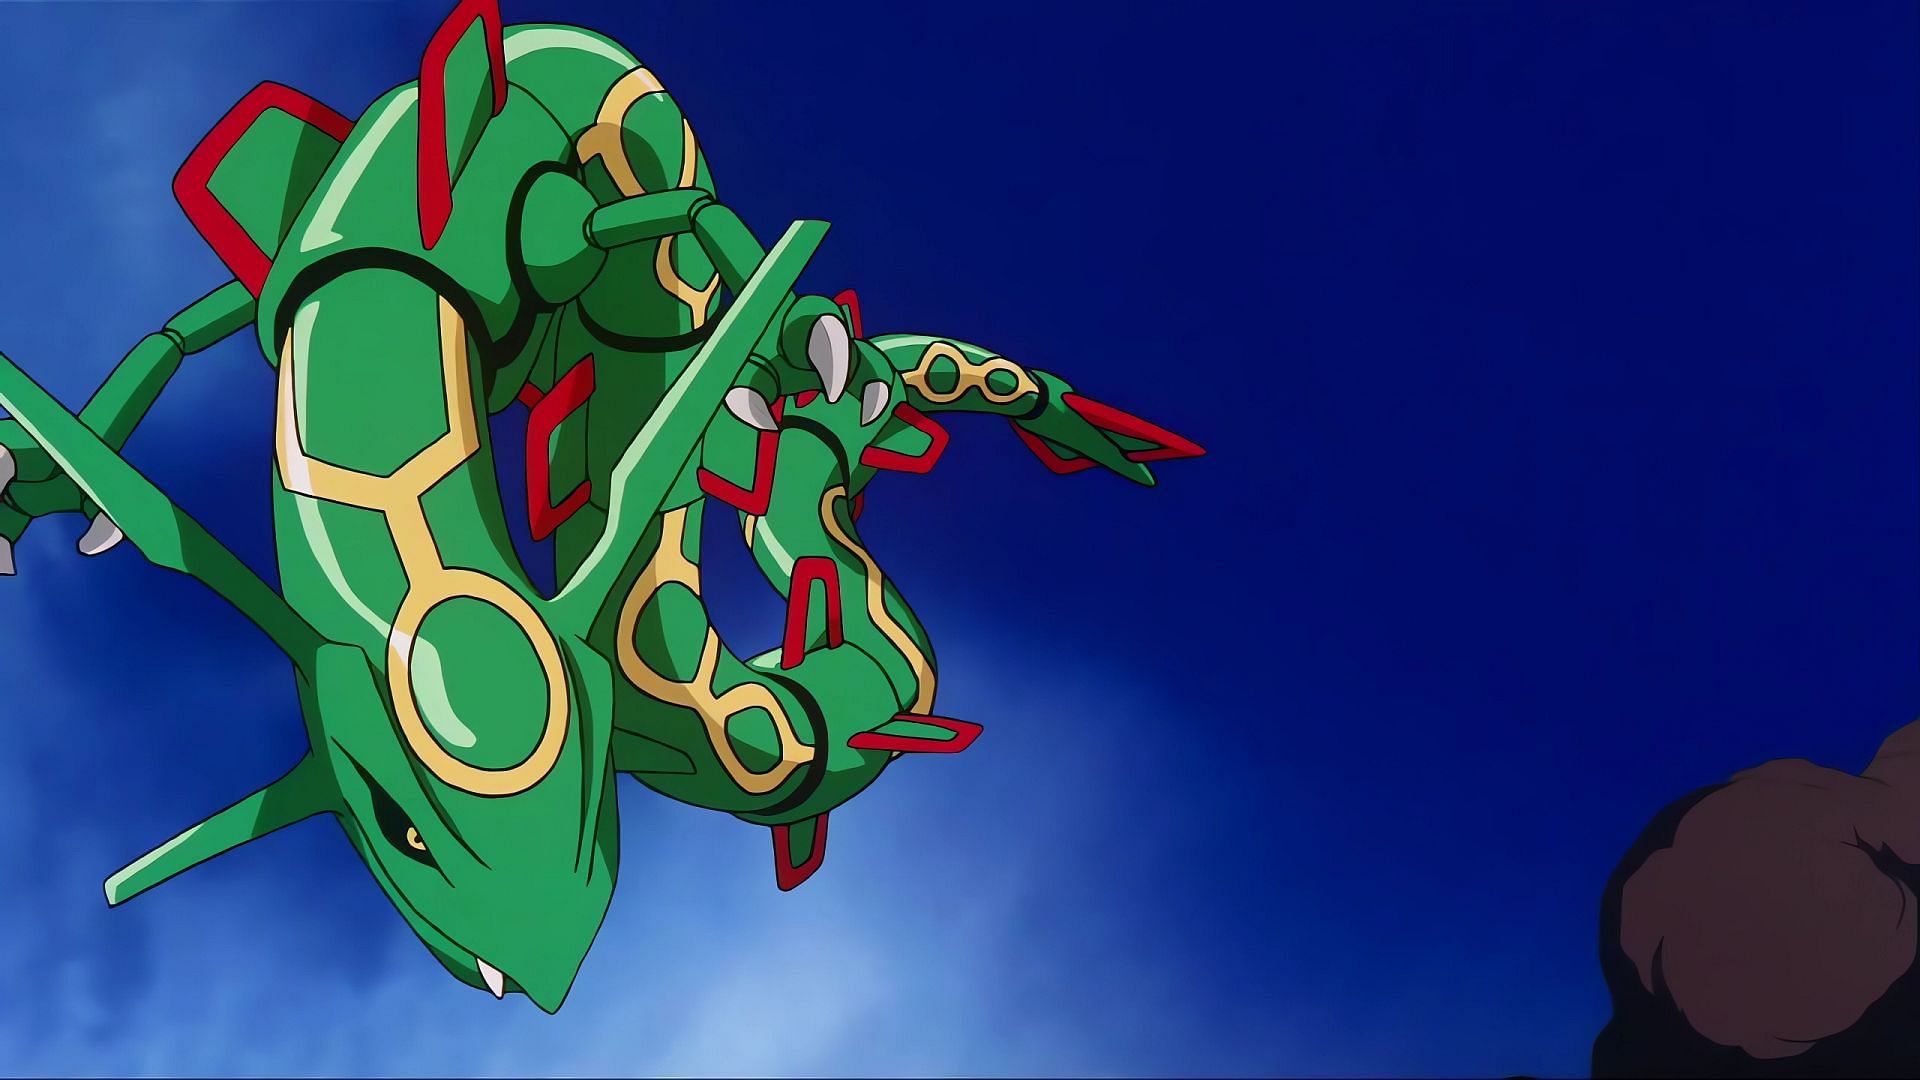 Flying-types like Rayquaza are a nightmare for Decidueye (Image via The Pokemon Company)